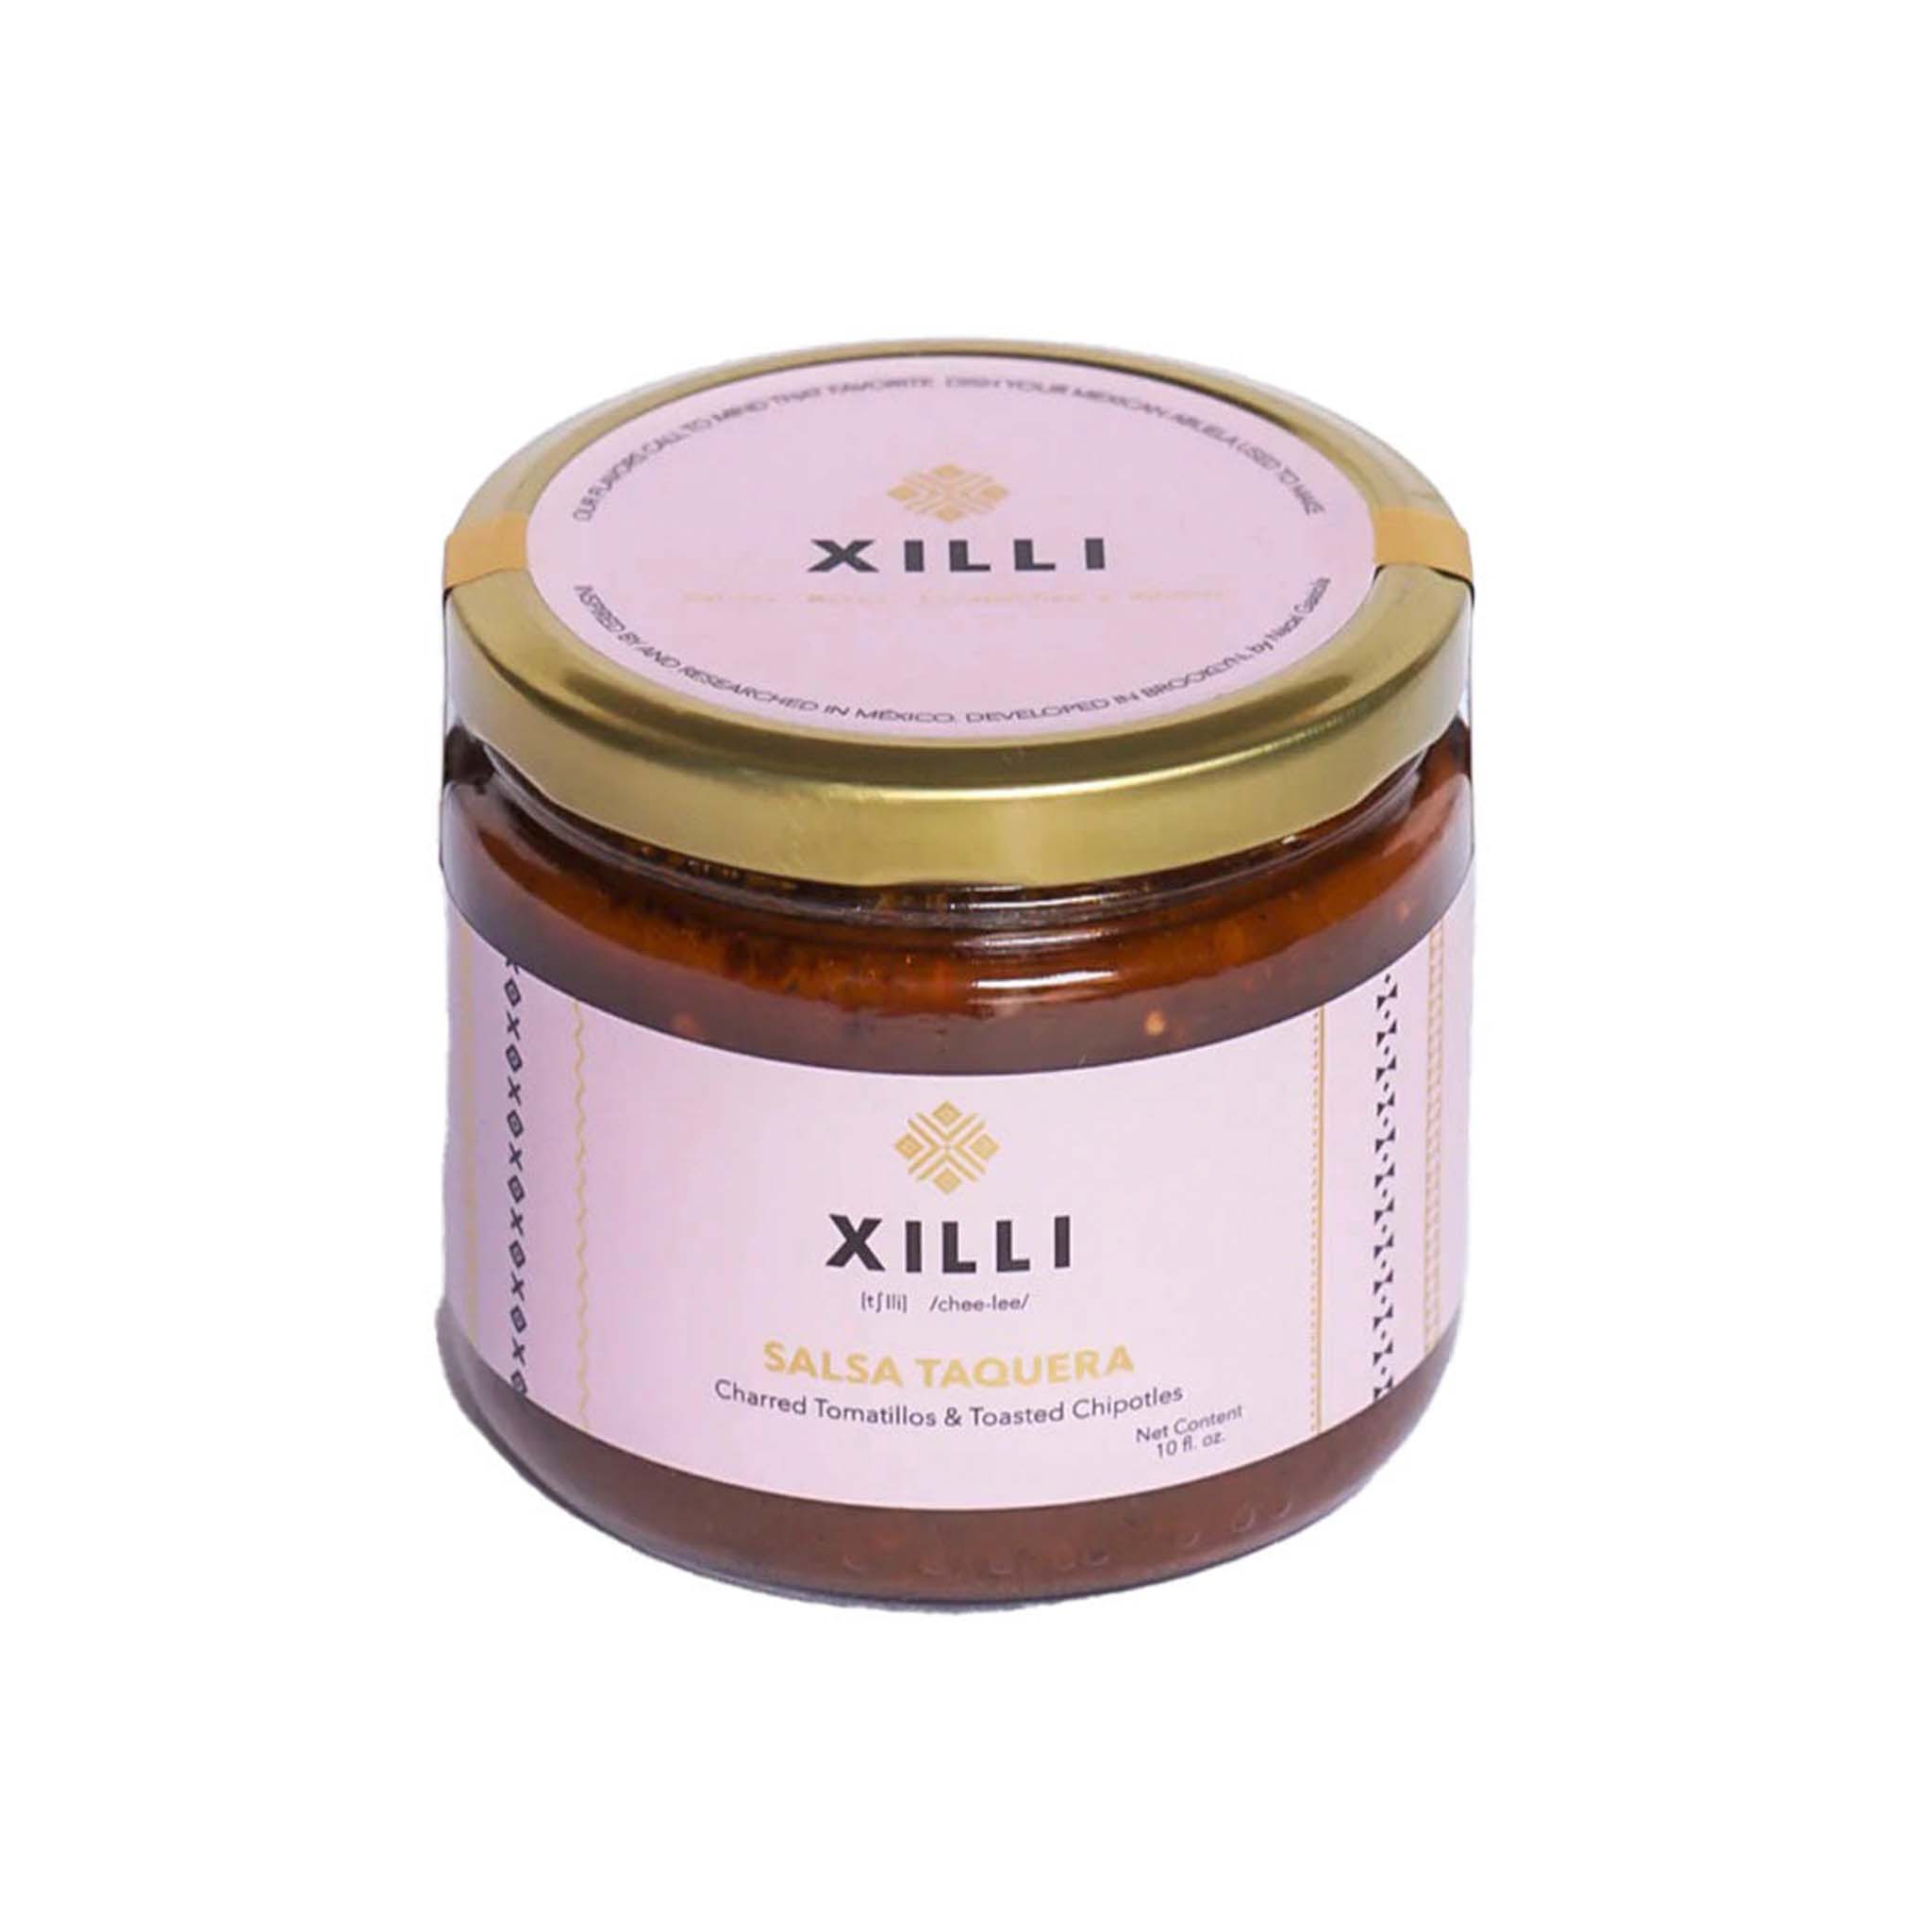 XILLI Salsa Taquera offers an ideal balance between sweet and spicy for an unbeatable flavor experience.